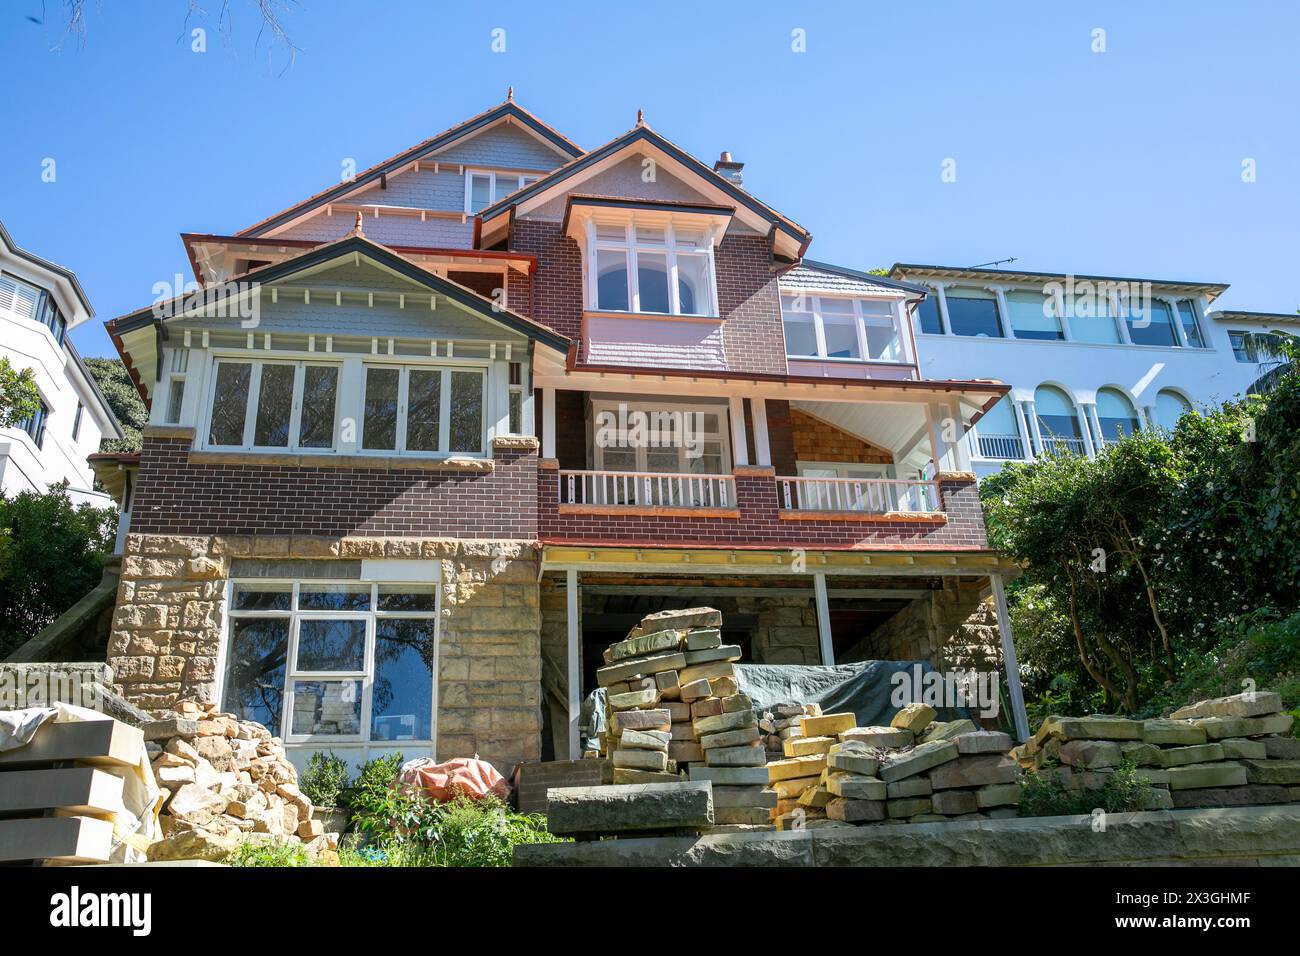 Arts and Crafts architectural style family home on Cremorne Point overlooking Mosman Bay, the property is being refurbished and developed,Sydney Stock Photo